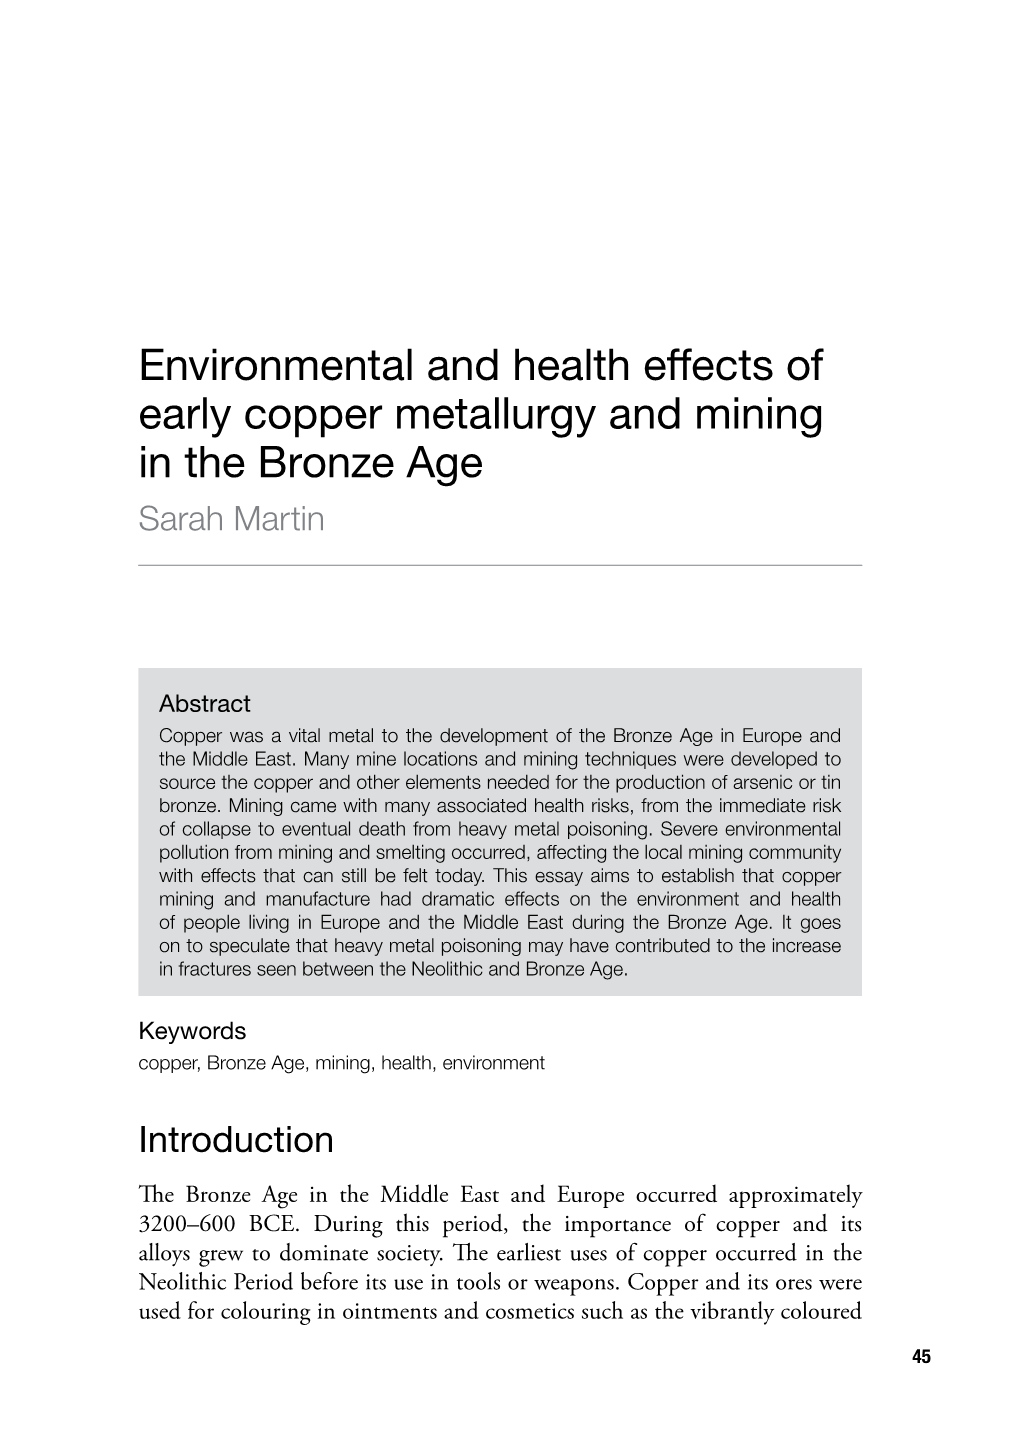 Environmental and Health Effects of Early Copper Metallurgy and Mining in the Bronze Age Sarah Martin